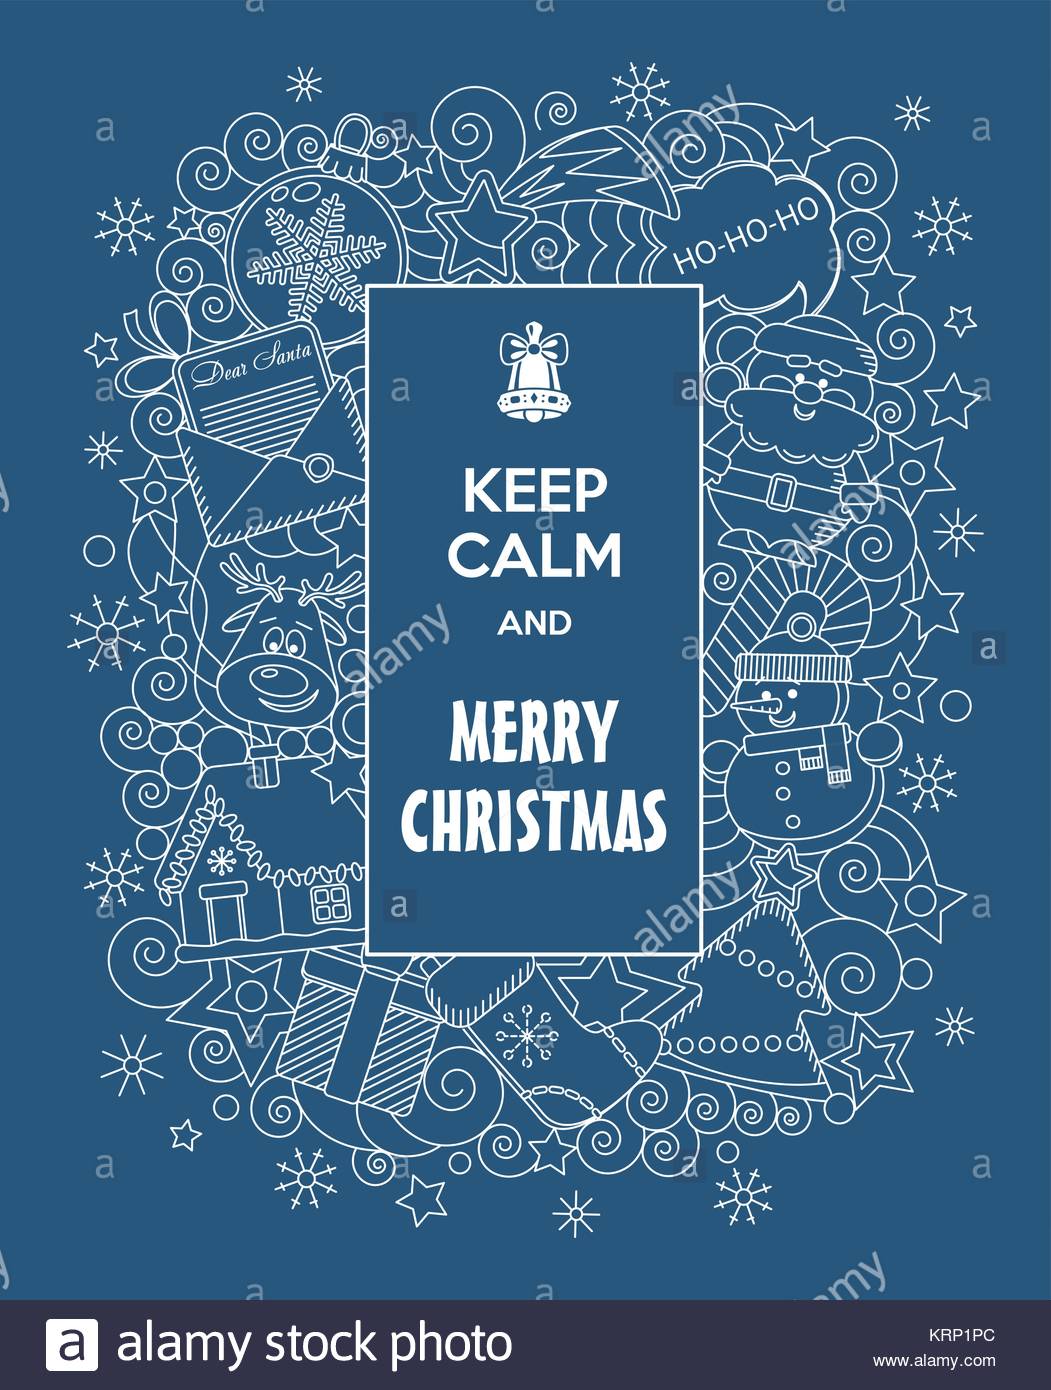 Merry Christmas Vector doodles illustration Keep Calm and Merry Christmas with funny cartoon characters in blue background Hand drawn Line art